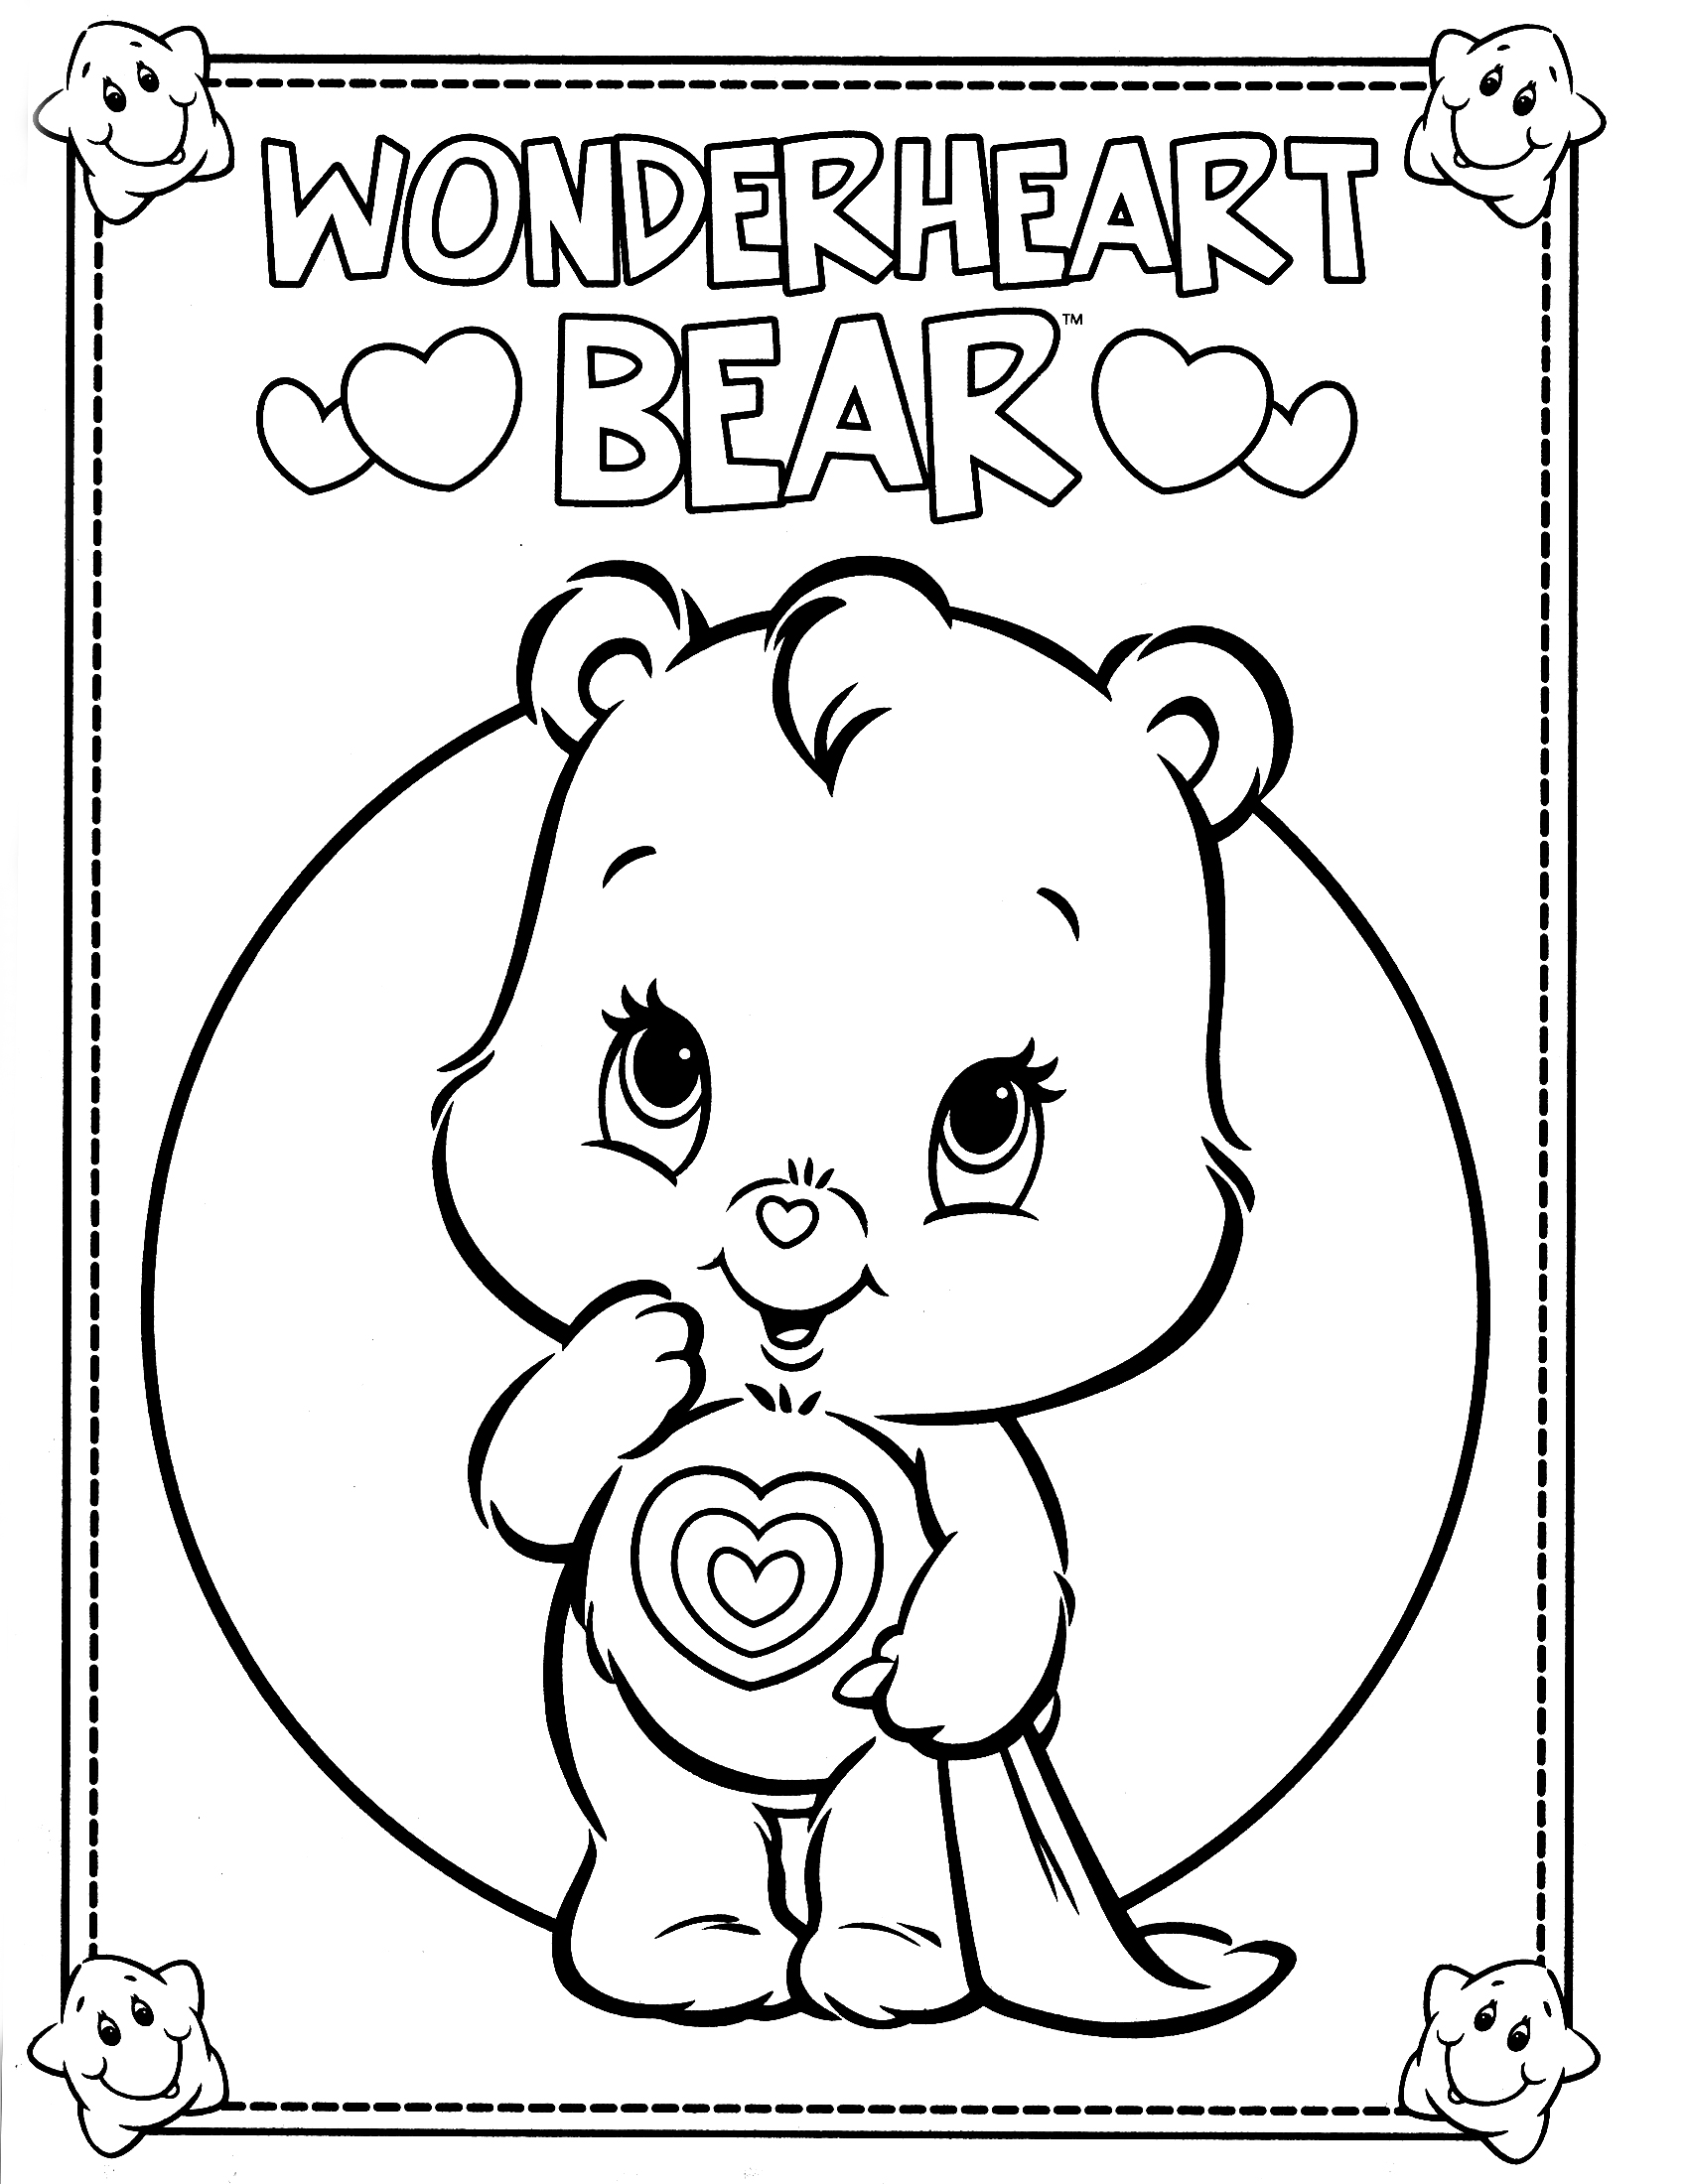 Bear Coloring Pages at GetColorings.com | Free printable colorings